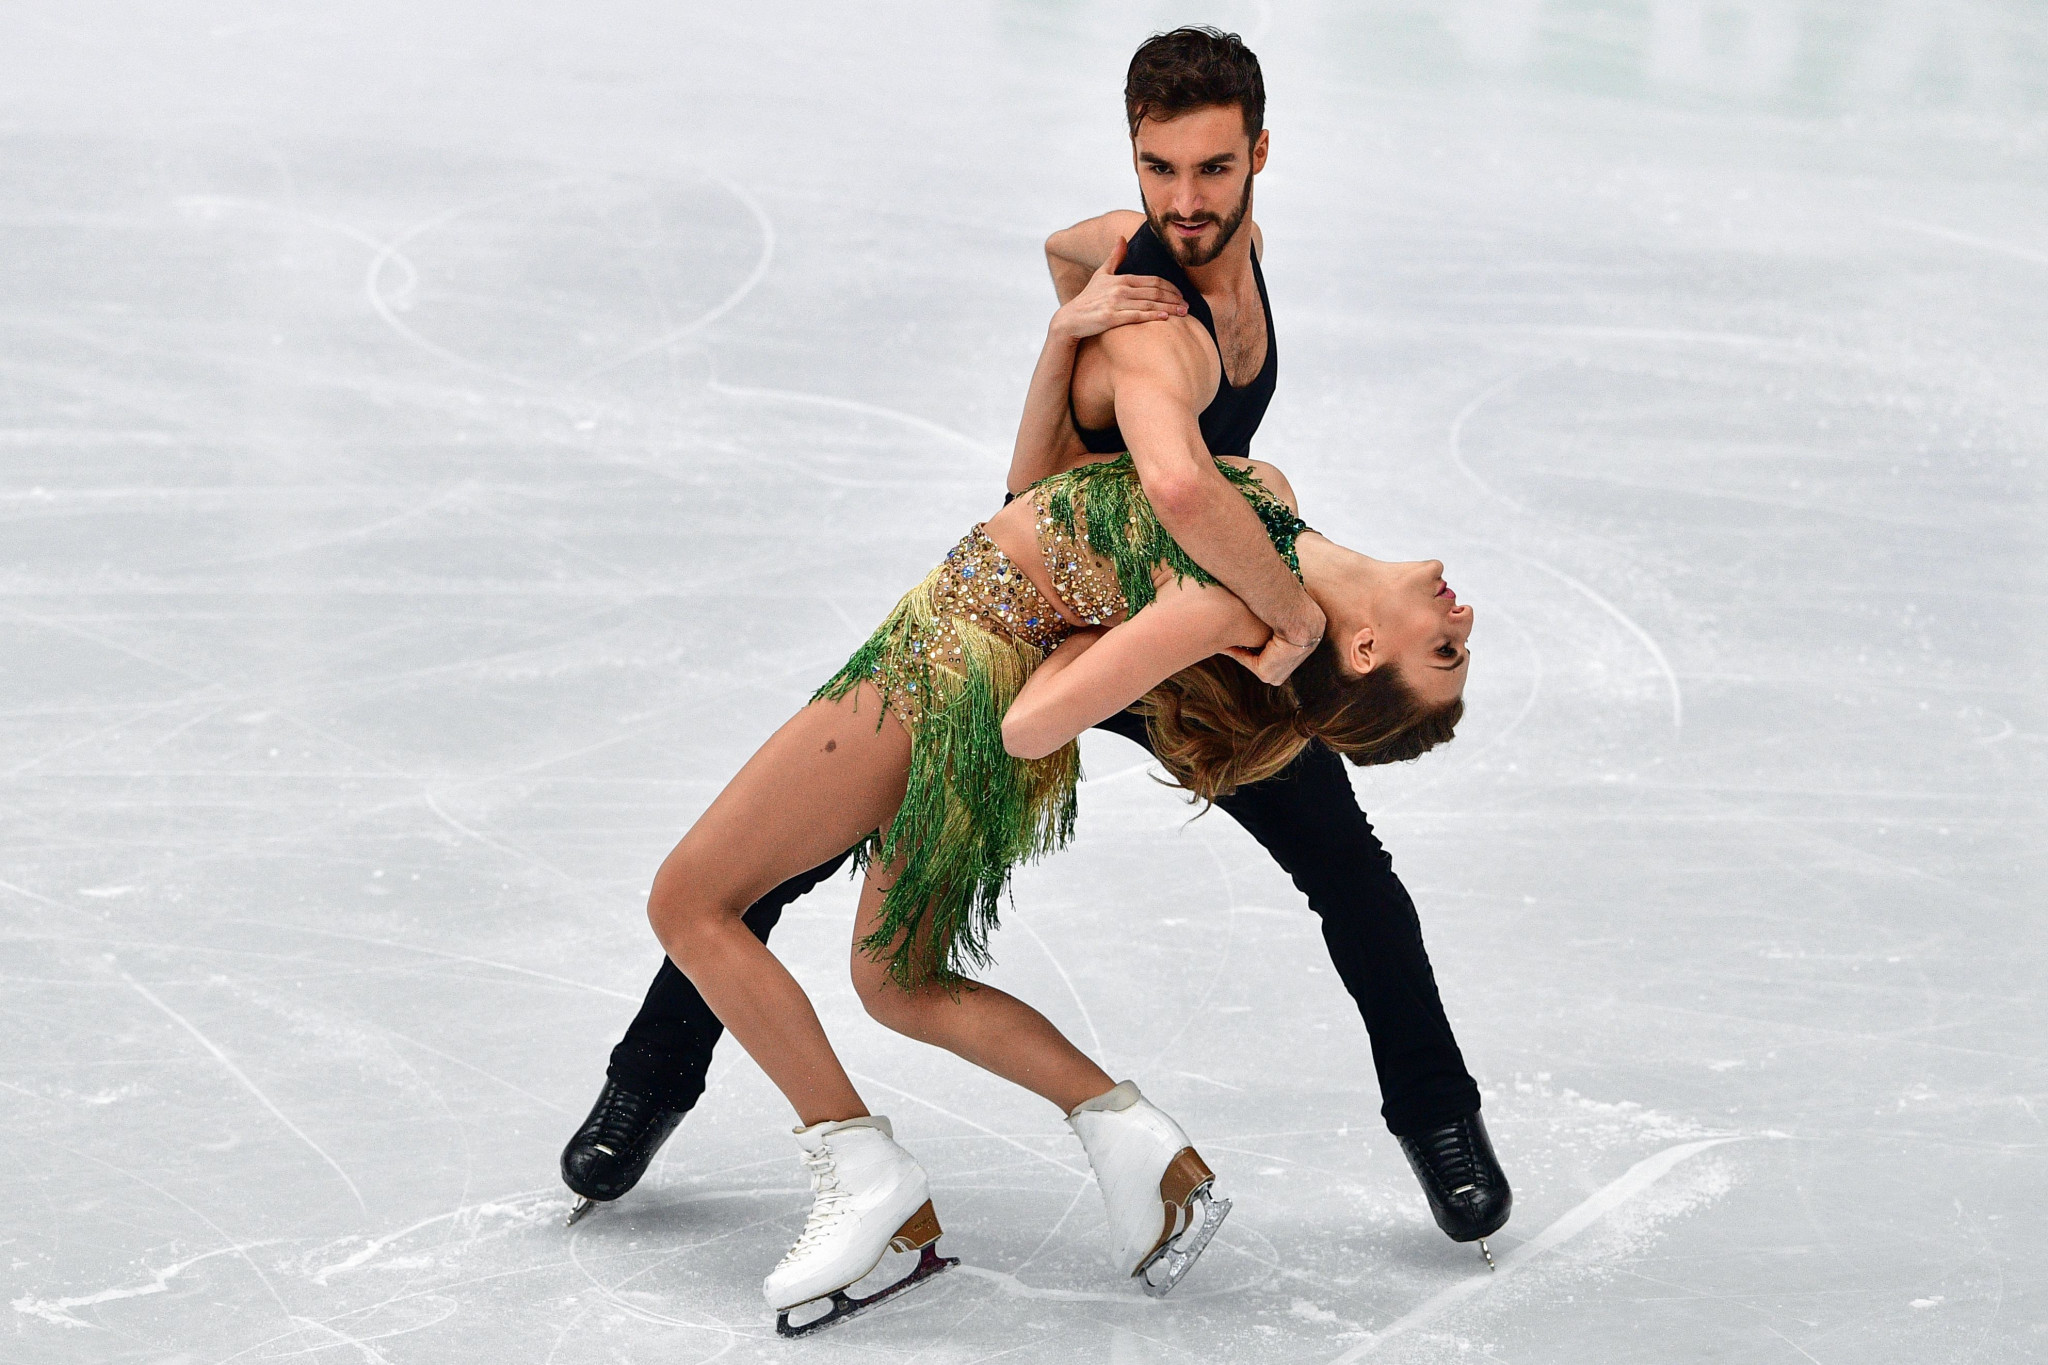 French pair Gabriella Papadakis and Guillaume Cizeron took control of the ice dance competition on day three of the ISU European Figure Skating Championships ©Getty Images